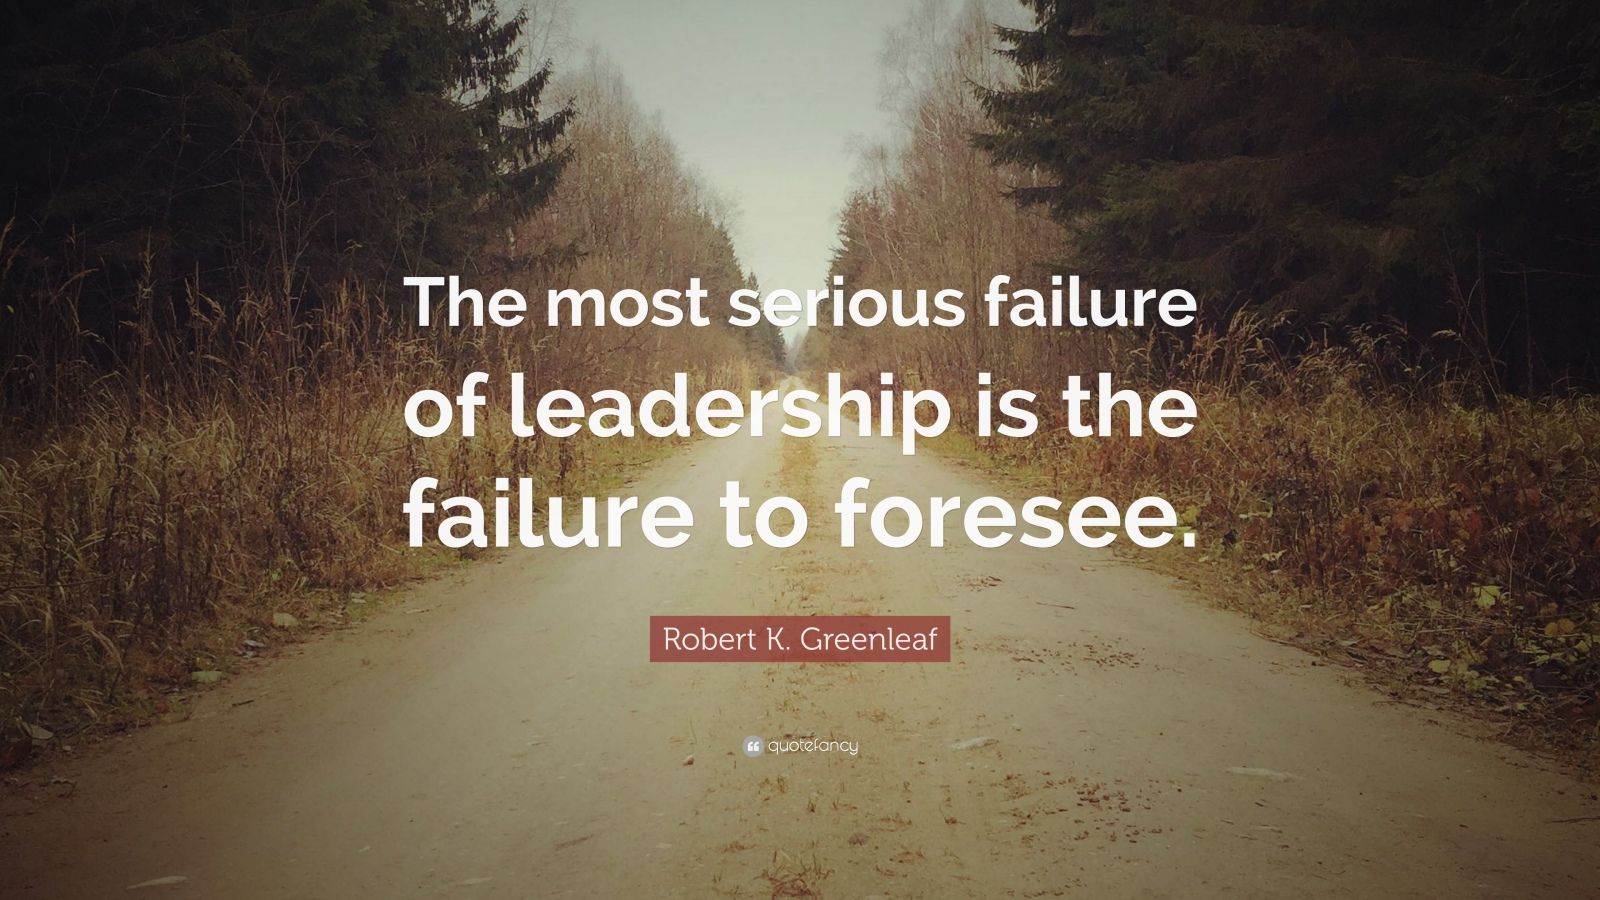 Robert K. Greenleaf Quote: “The most serious failure of leadership is ...